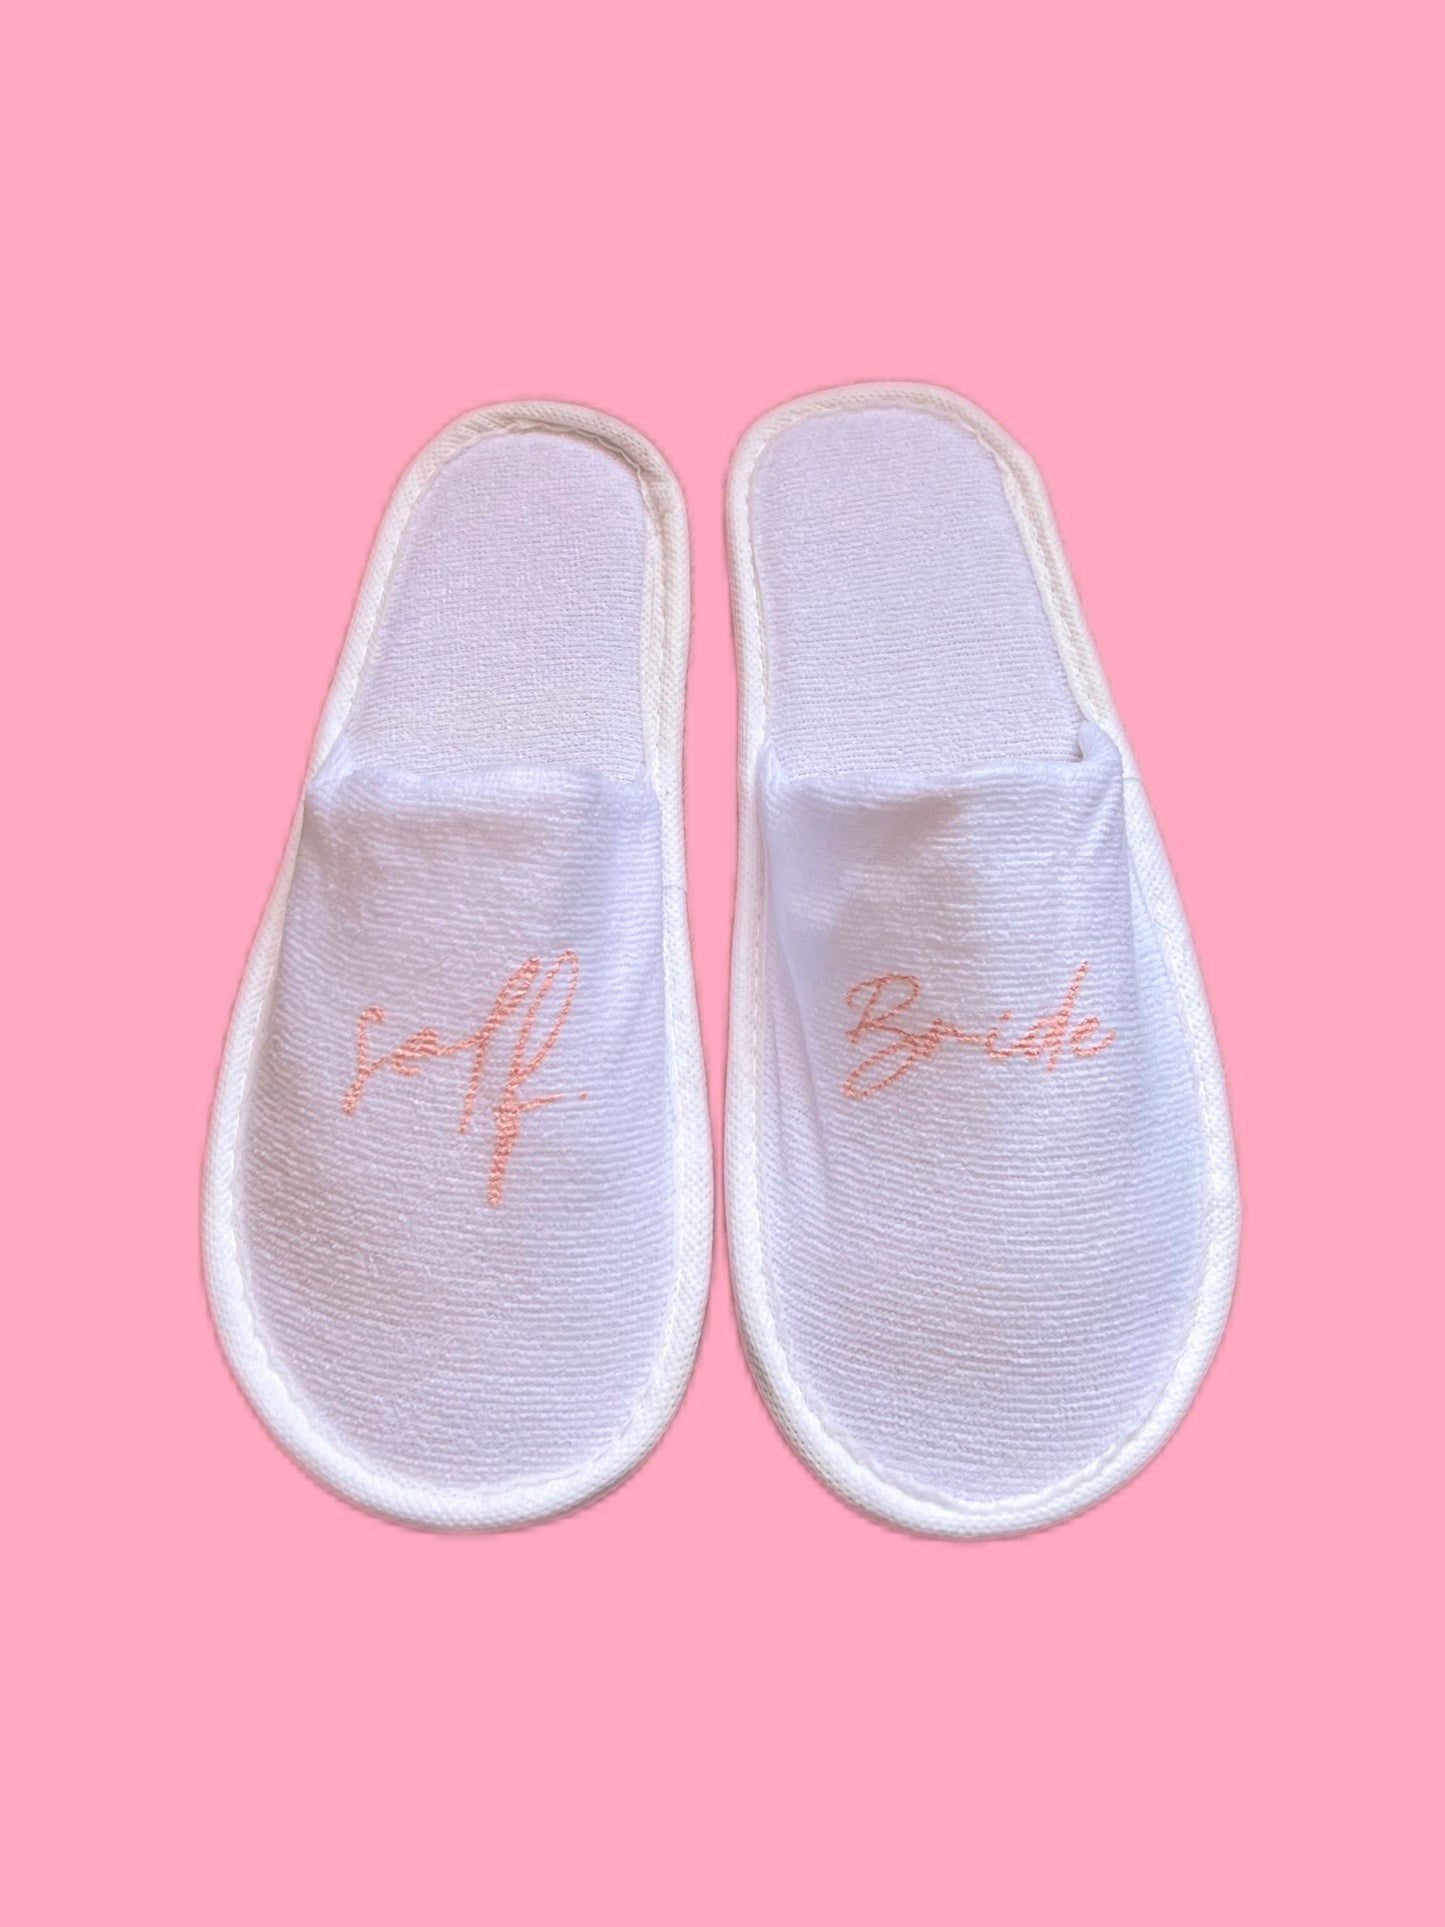 the disposable slippers